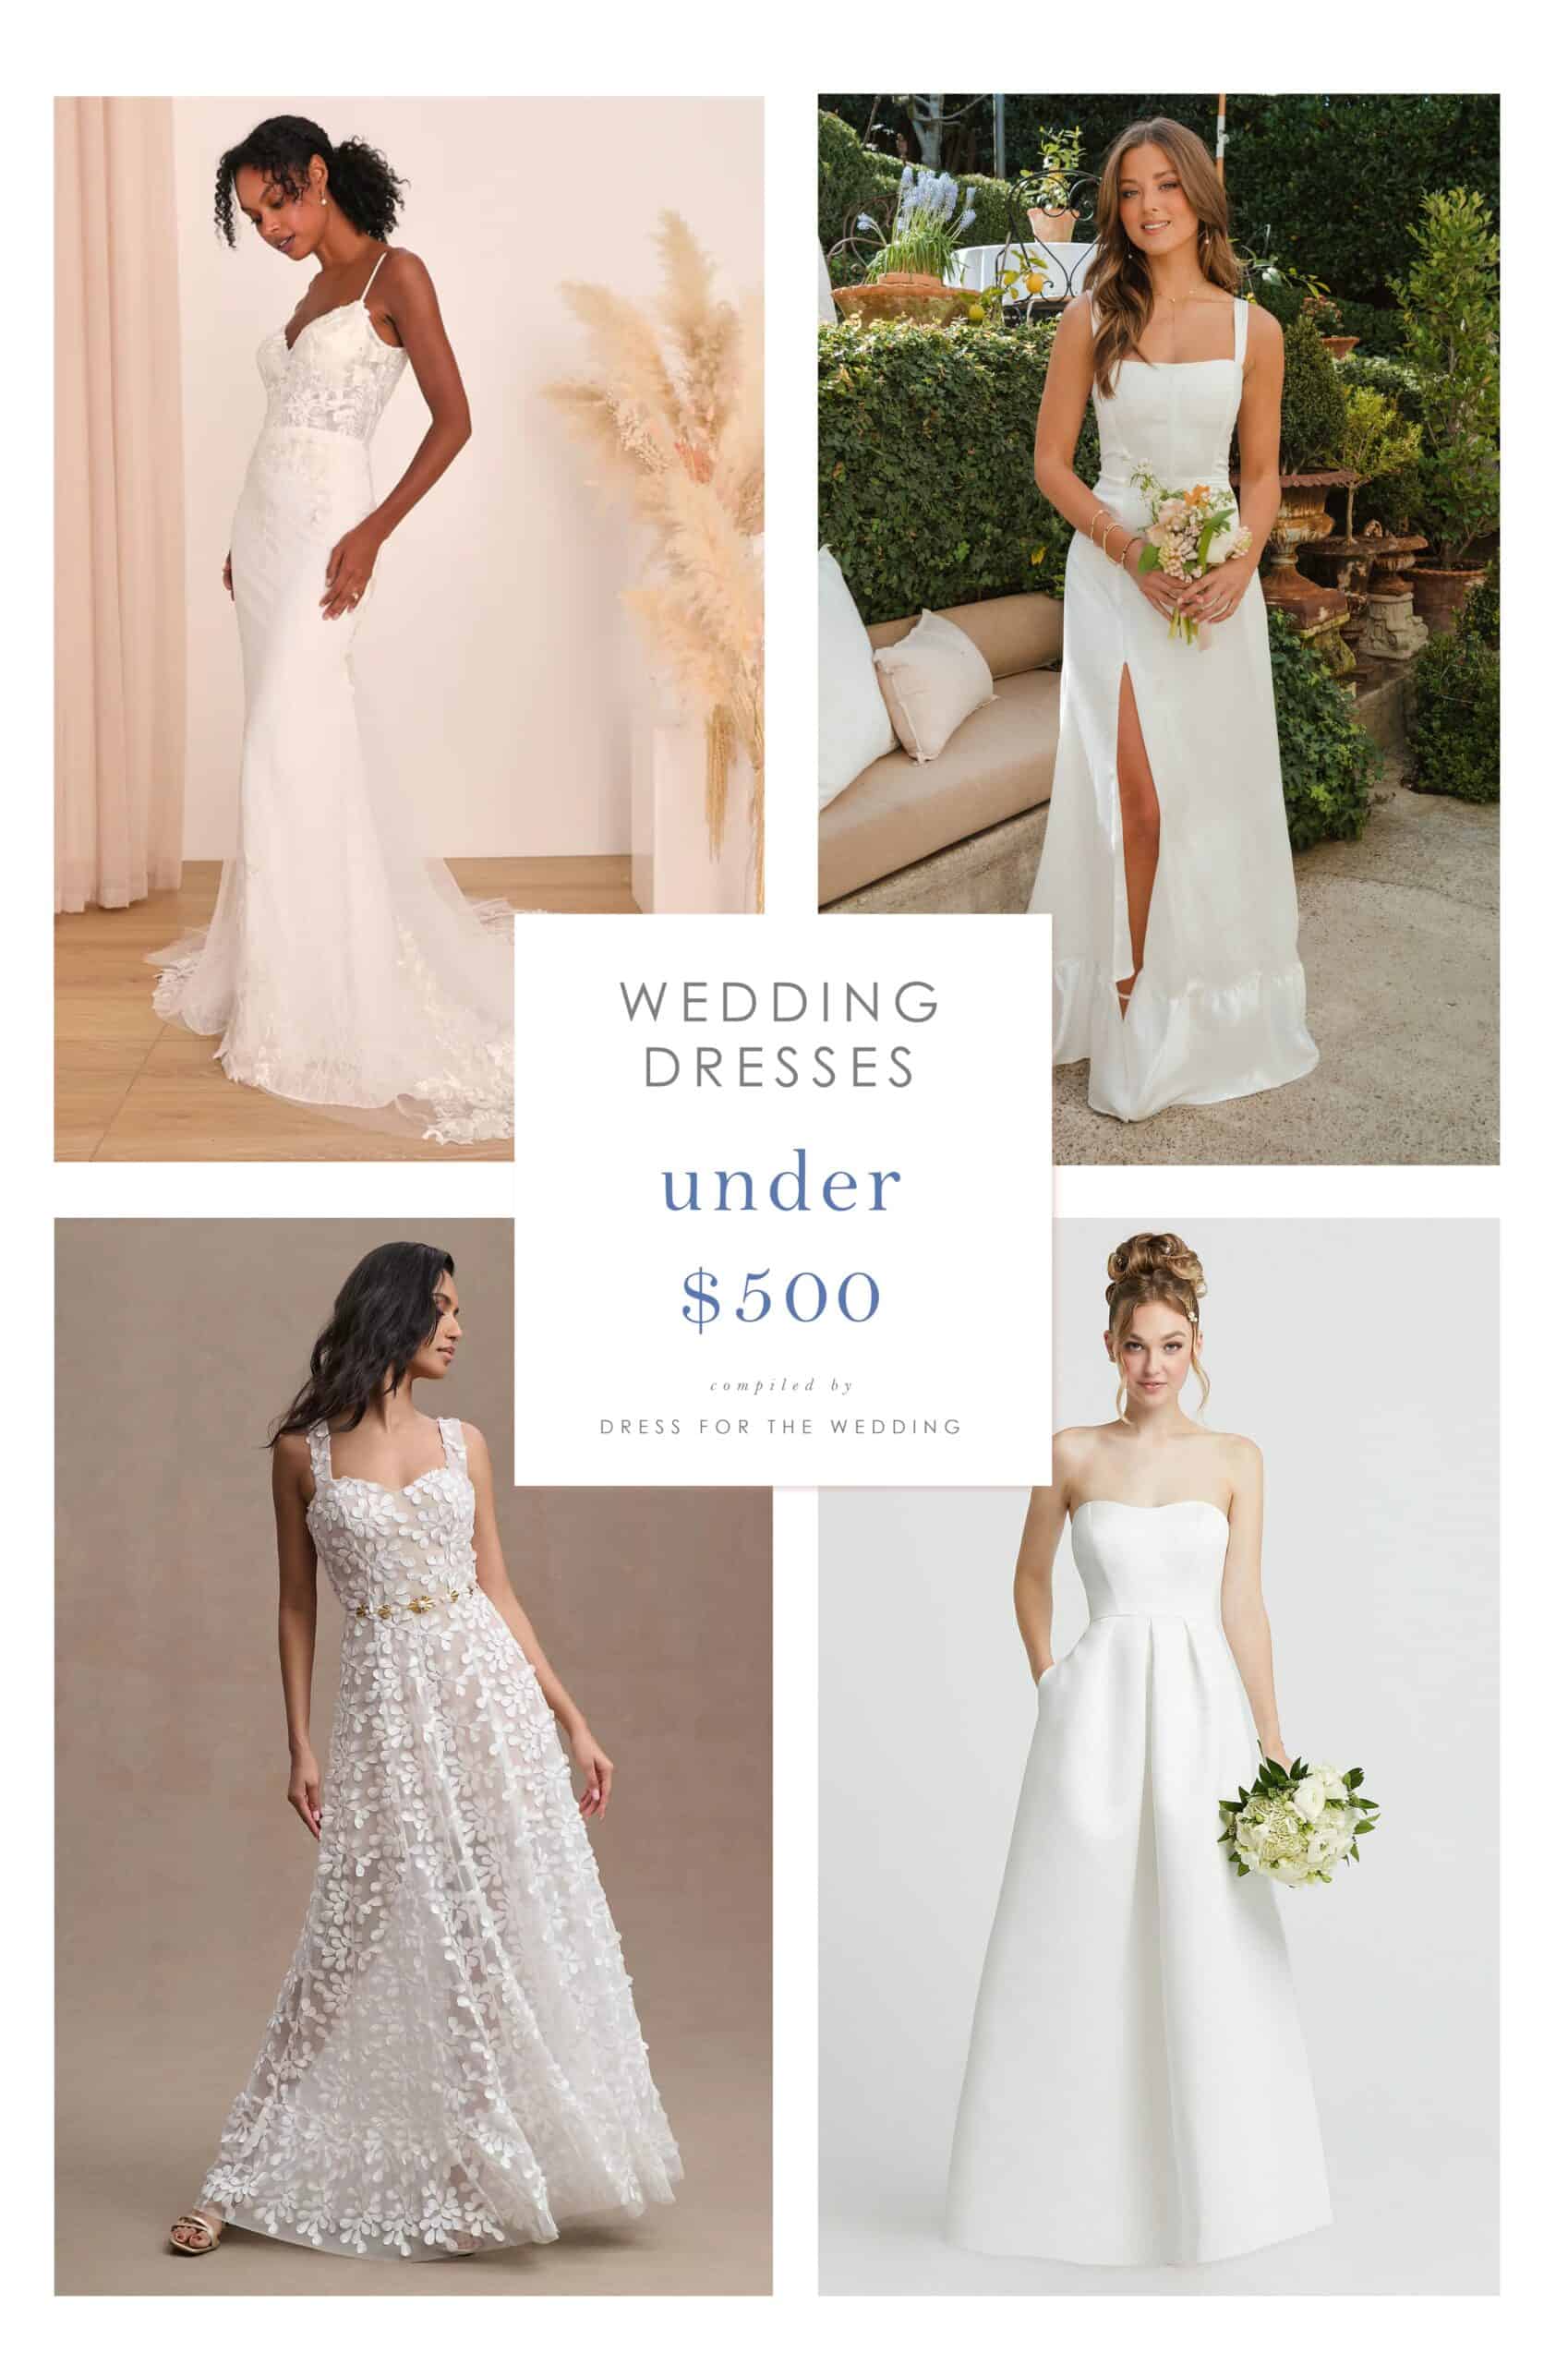 The Most Affordable Wedding Dresses Under $500  Wedding dresses under 500,  Sheer wedding dress, Boho wedding dress lace